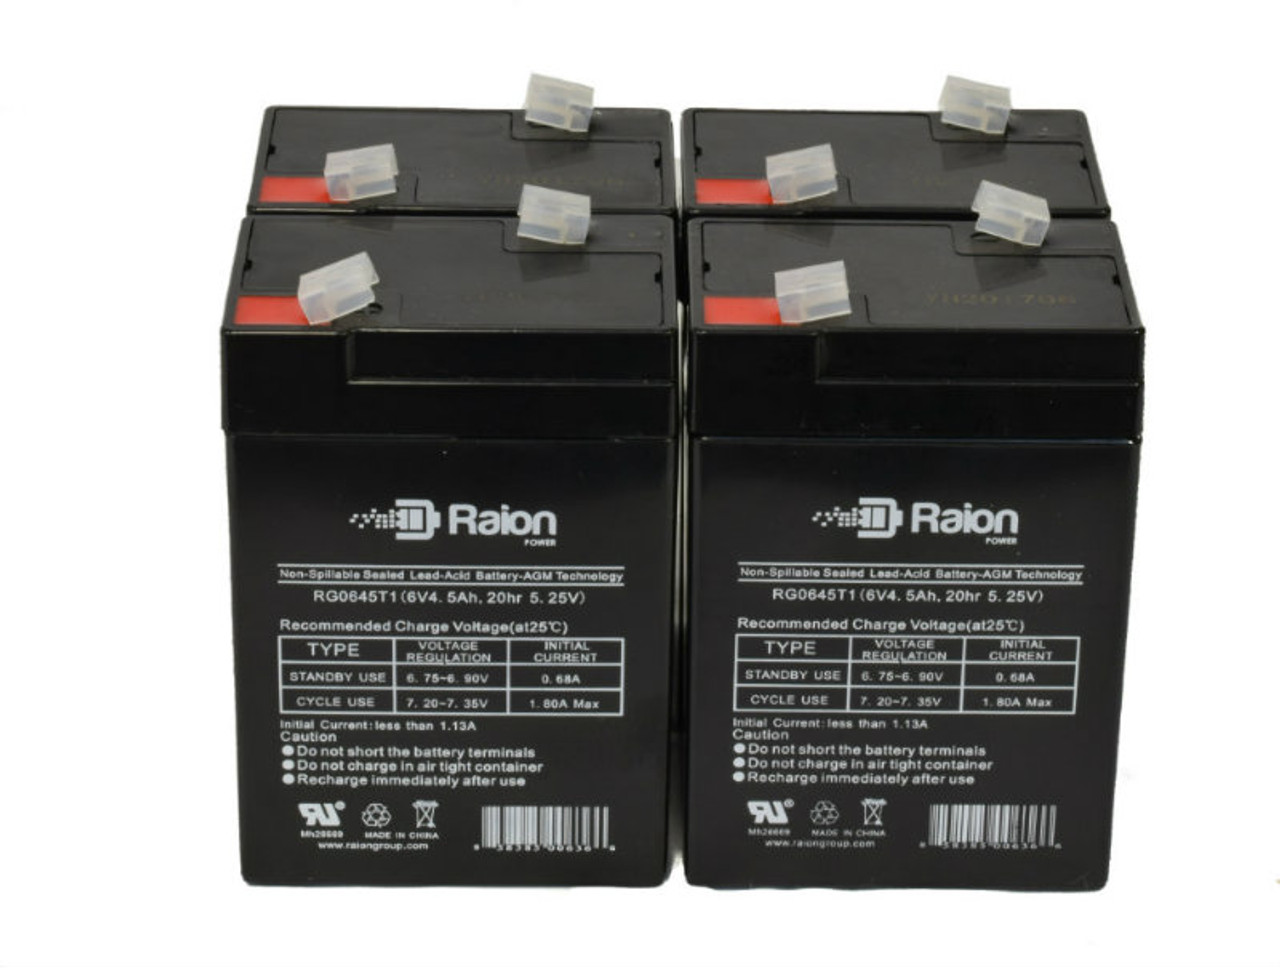 Raion Power 6 Volt 4.5Ah RG0645T1 Replacement Battery for Kaiying KS3-6B - 4 Pack